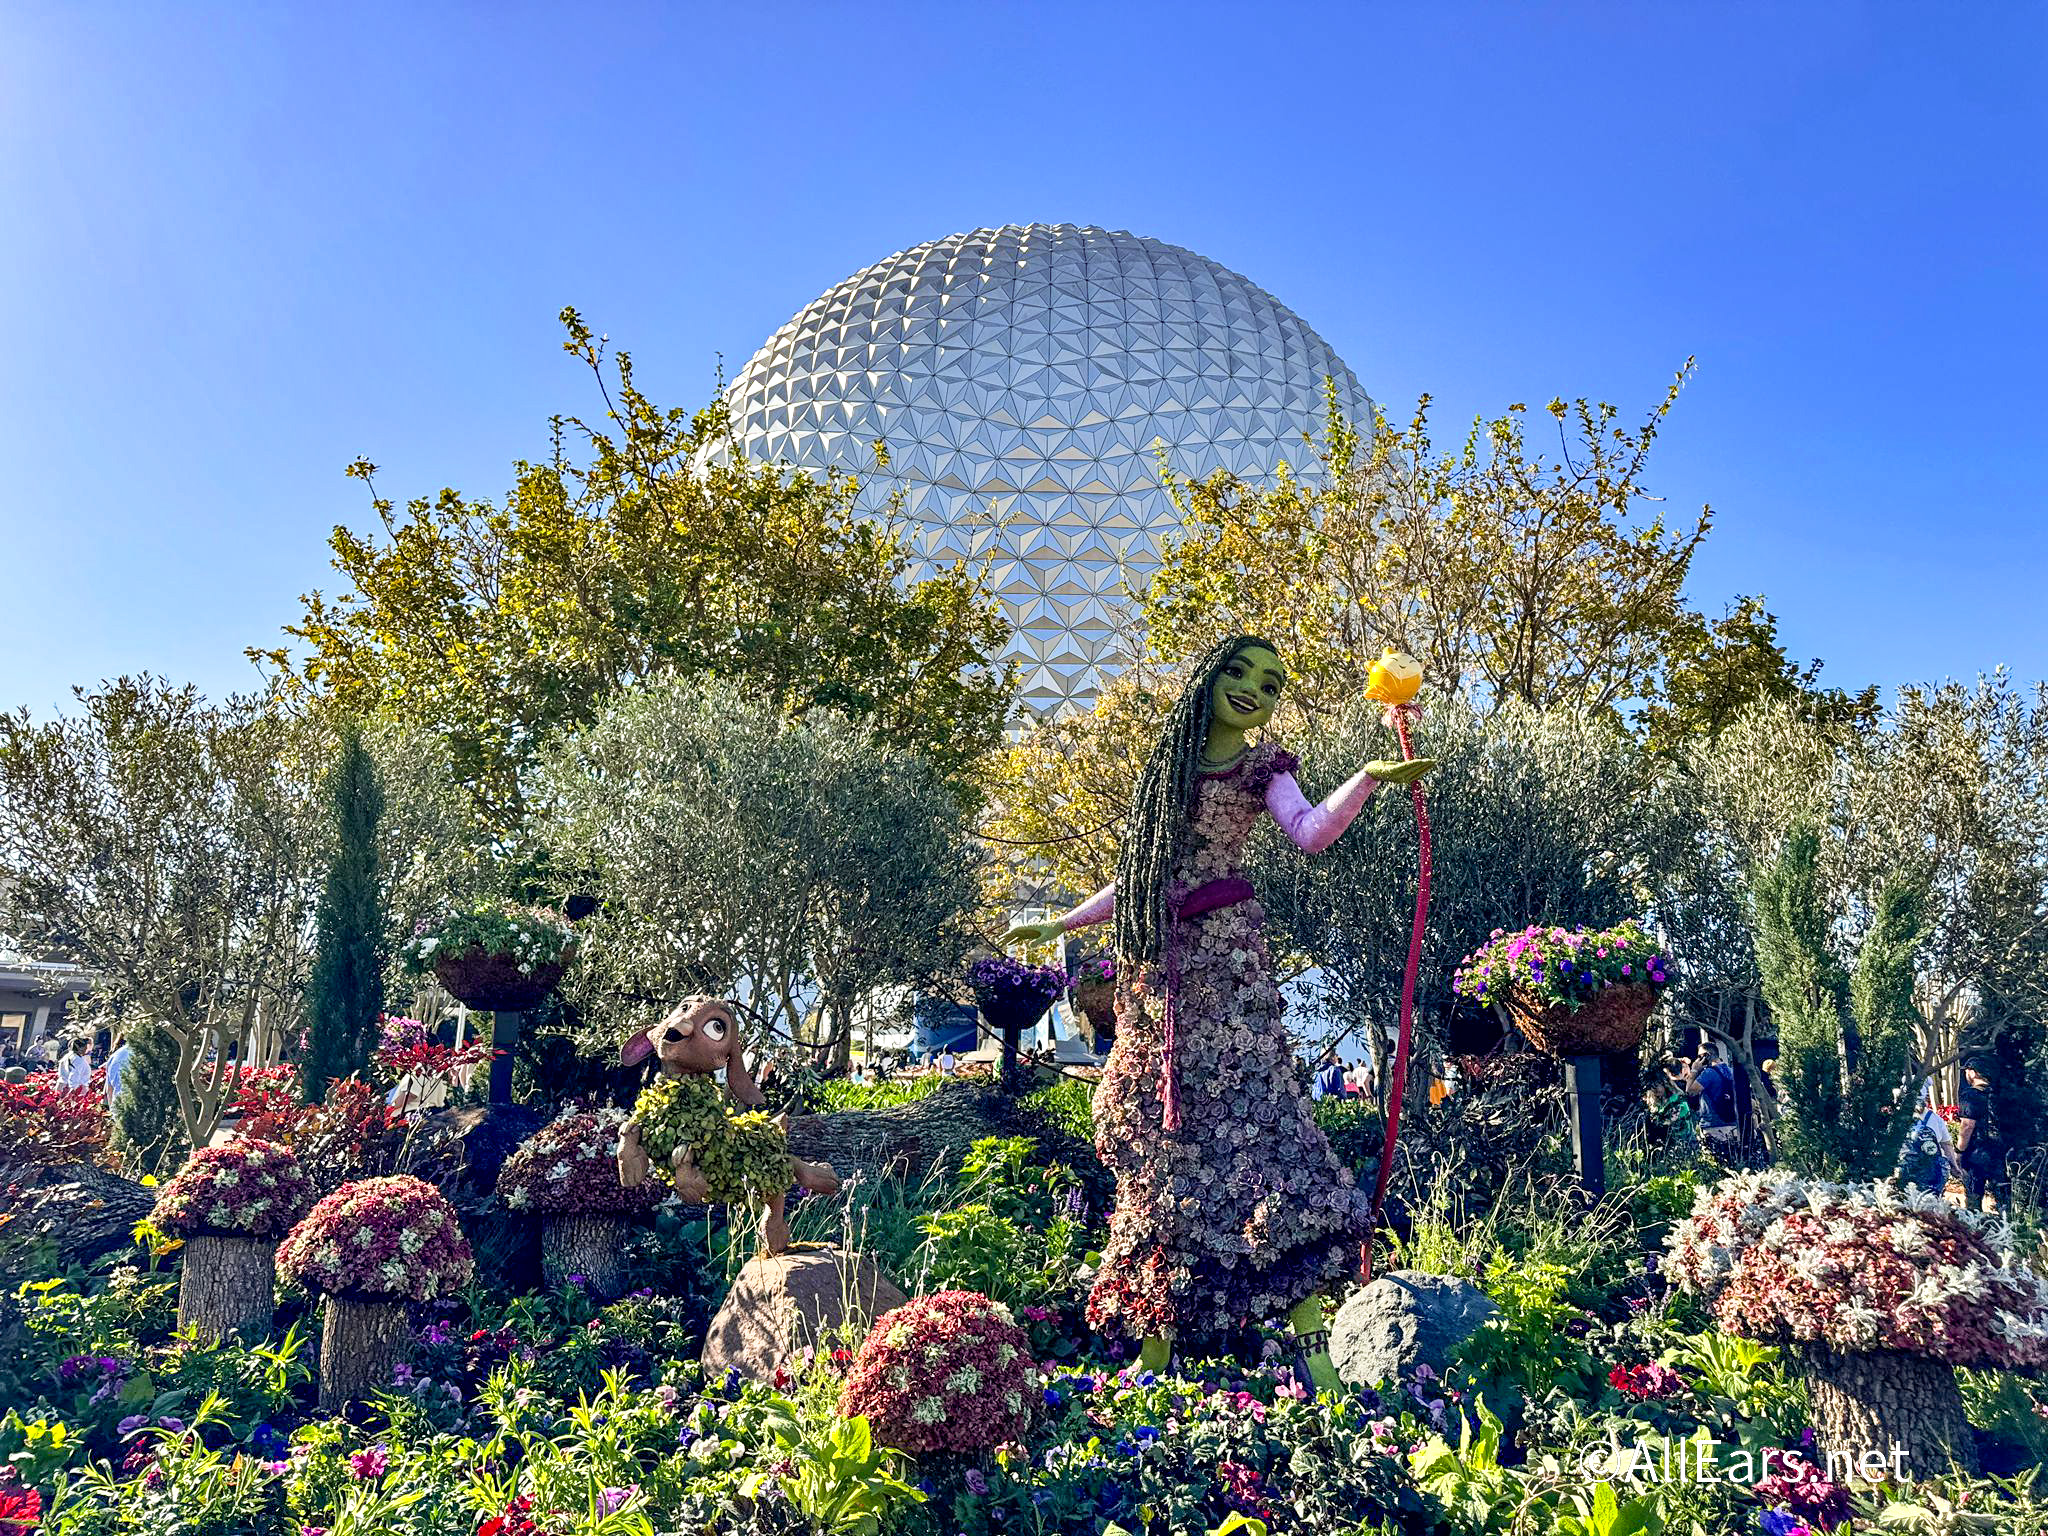 The NEW Thing You Didn’t Know You Could Do in EPCOT